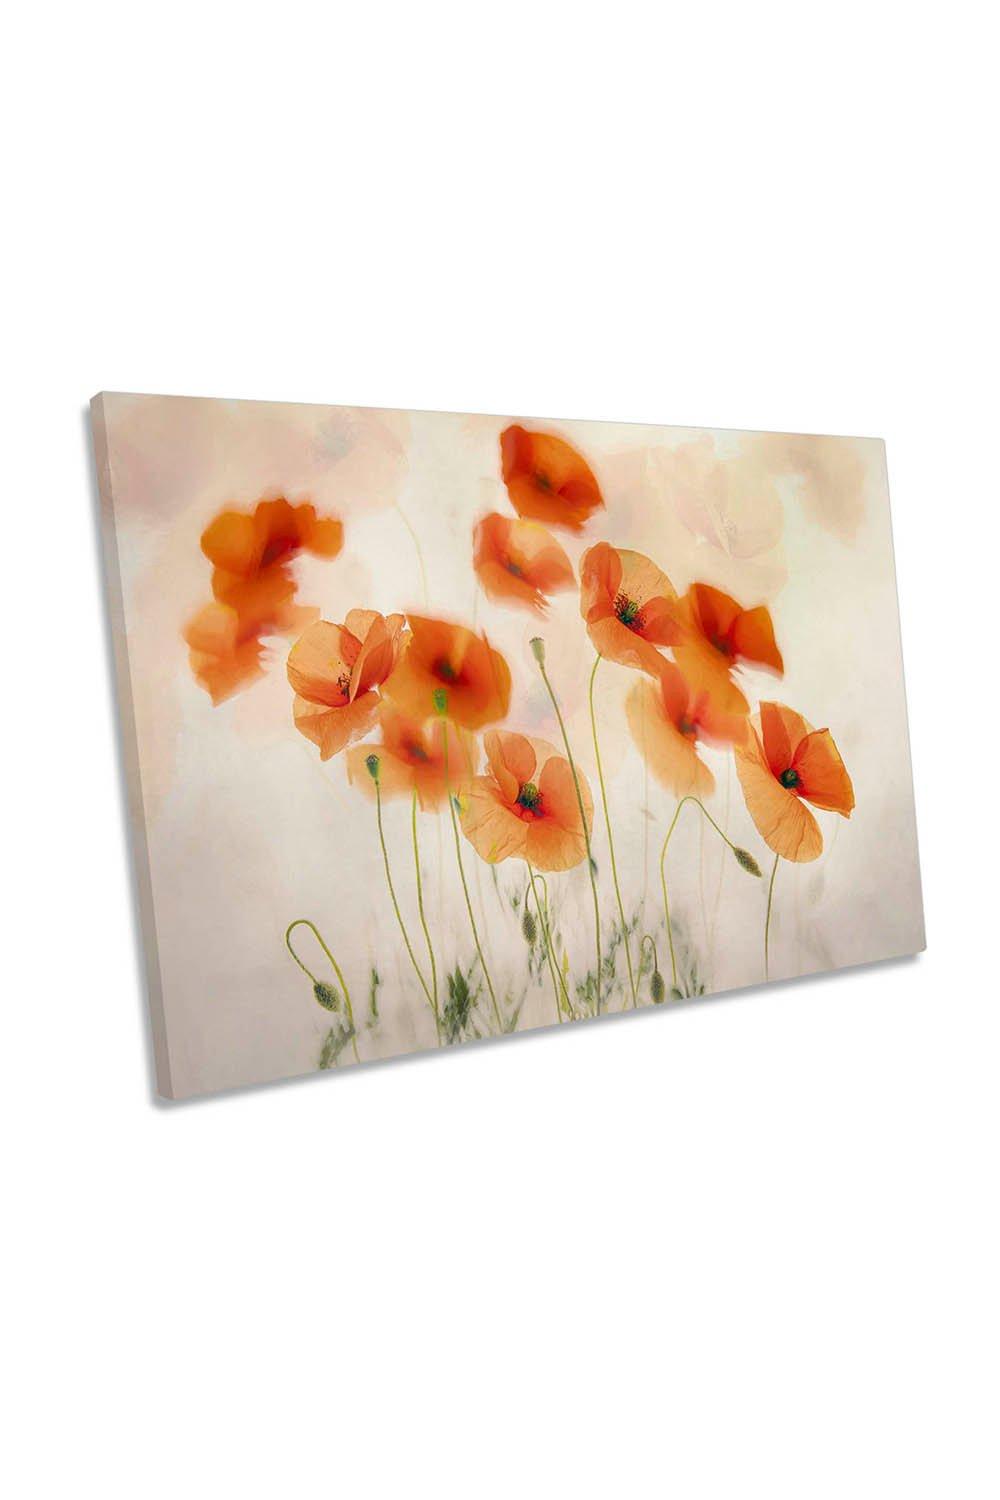 Waving in the Wind Red Poppy Flowers Canvas Wall Art Picture Print